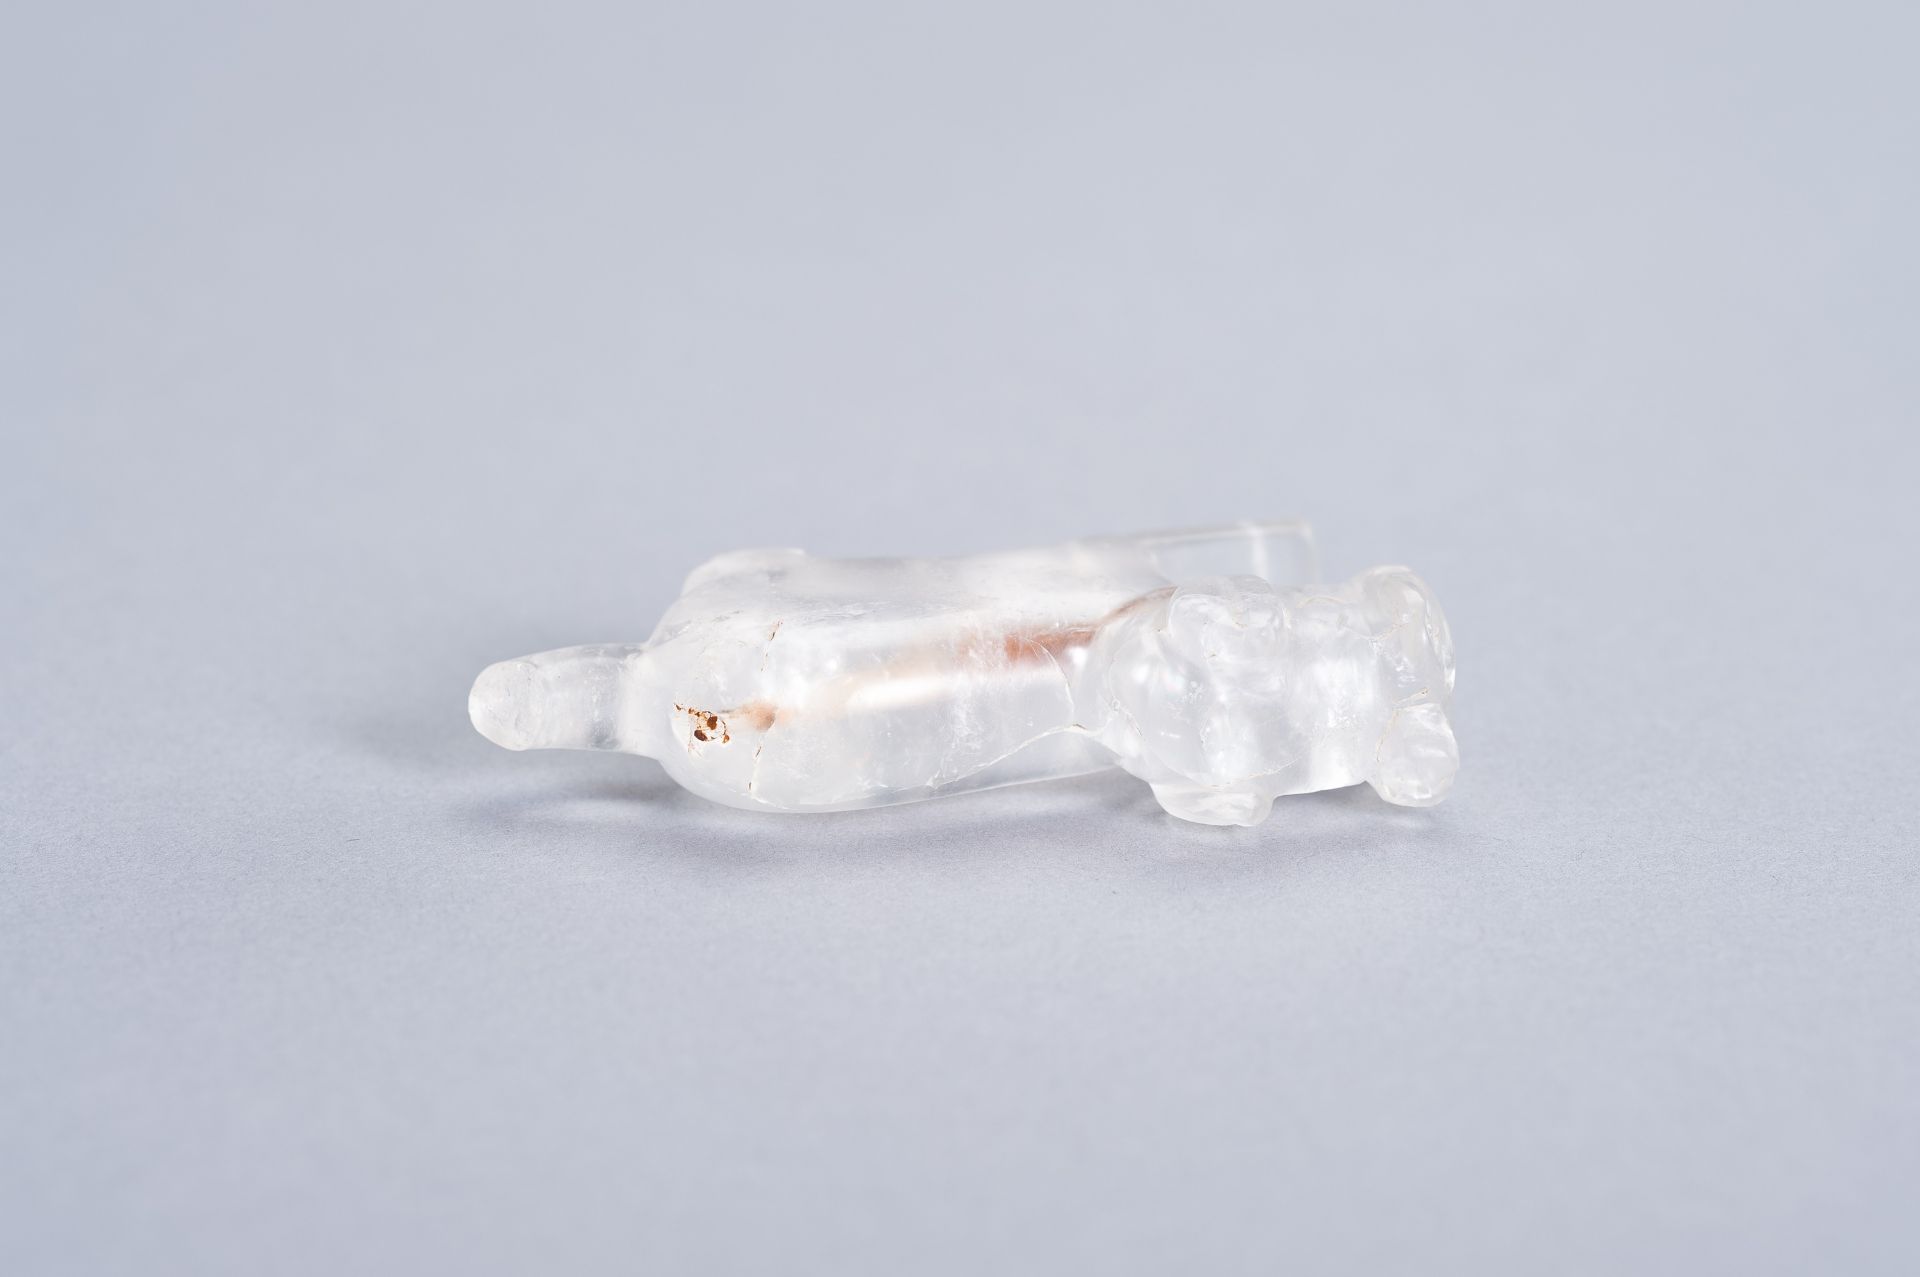 A PYU ROCK CRYSTAL TALISMAN OF A TIGER WITH CUB IN ITS MOUTH - Image 5 of 6